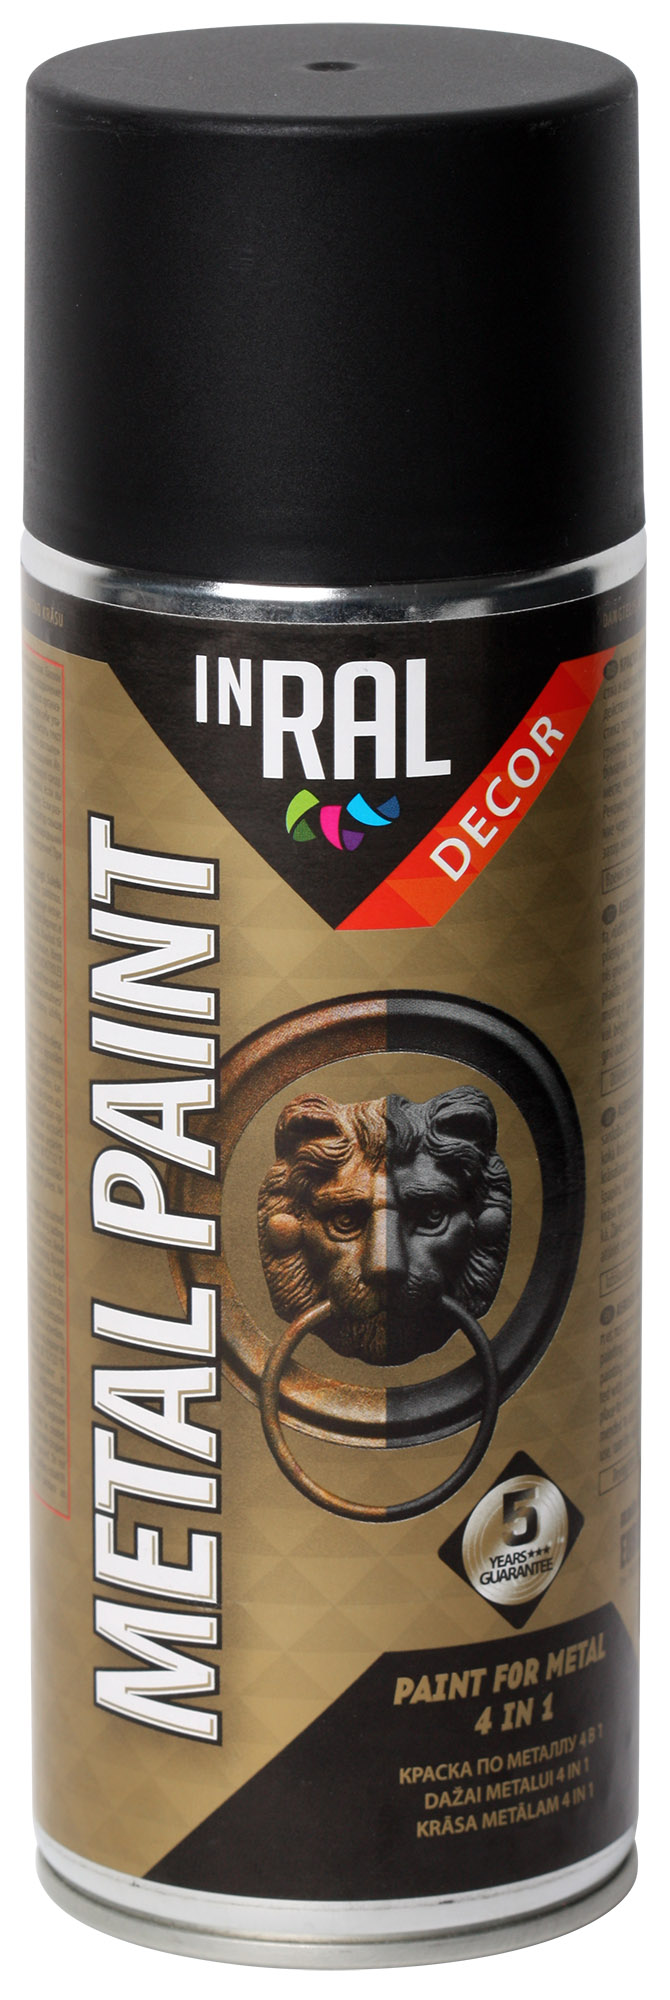 INRAL Decorative spray paint METAL PAINT 4 IN 1